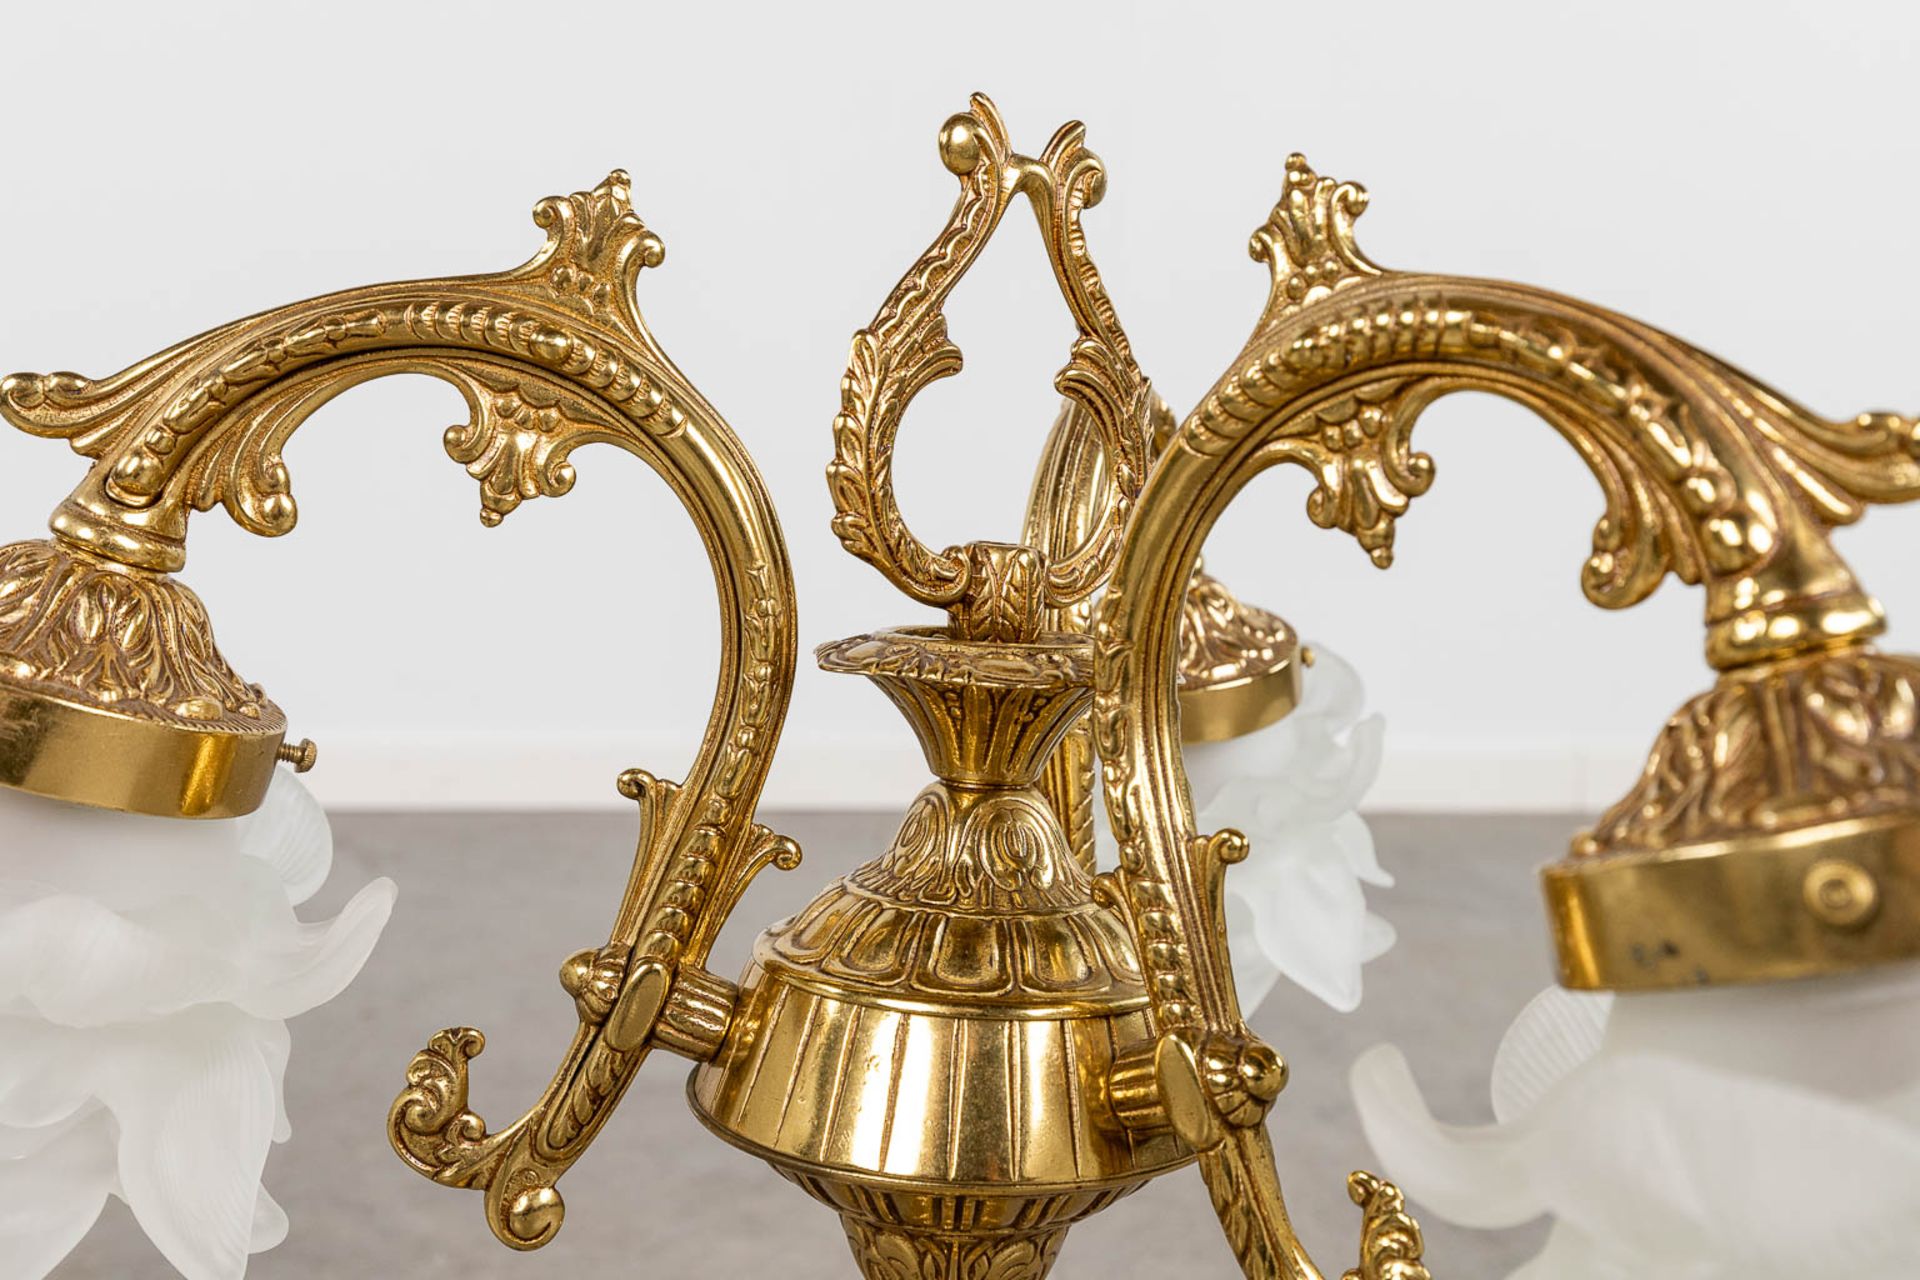 A decorative floor lamp and table lamp, brass, decorated with glass. 20th C. (H: 167 x D: 47 cm) - Image 11 of 13